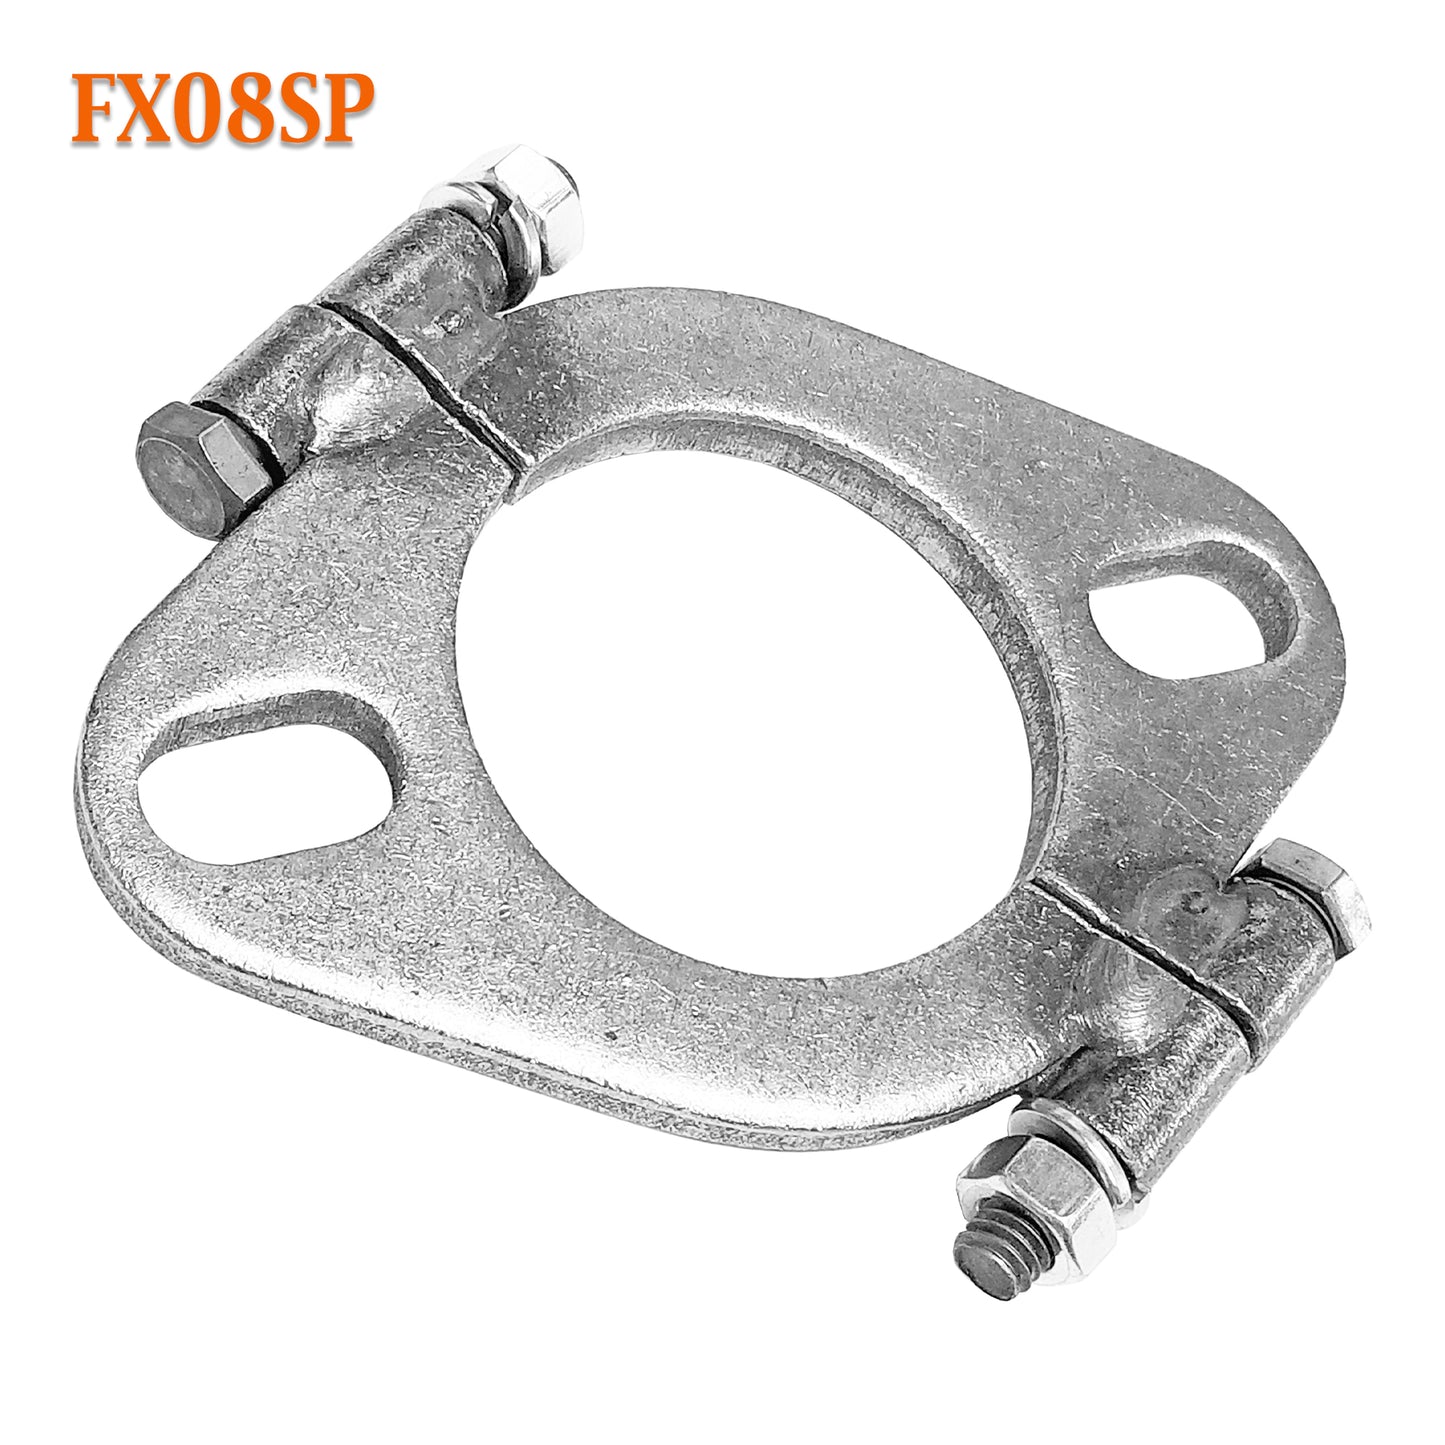 FX08SP 2 3/8" ID Flat Oval Two Bolt Split Exhaust Flange For 2.25" - 2.375" Pipe